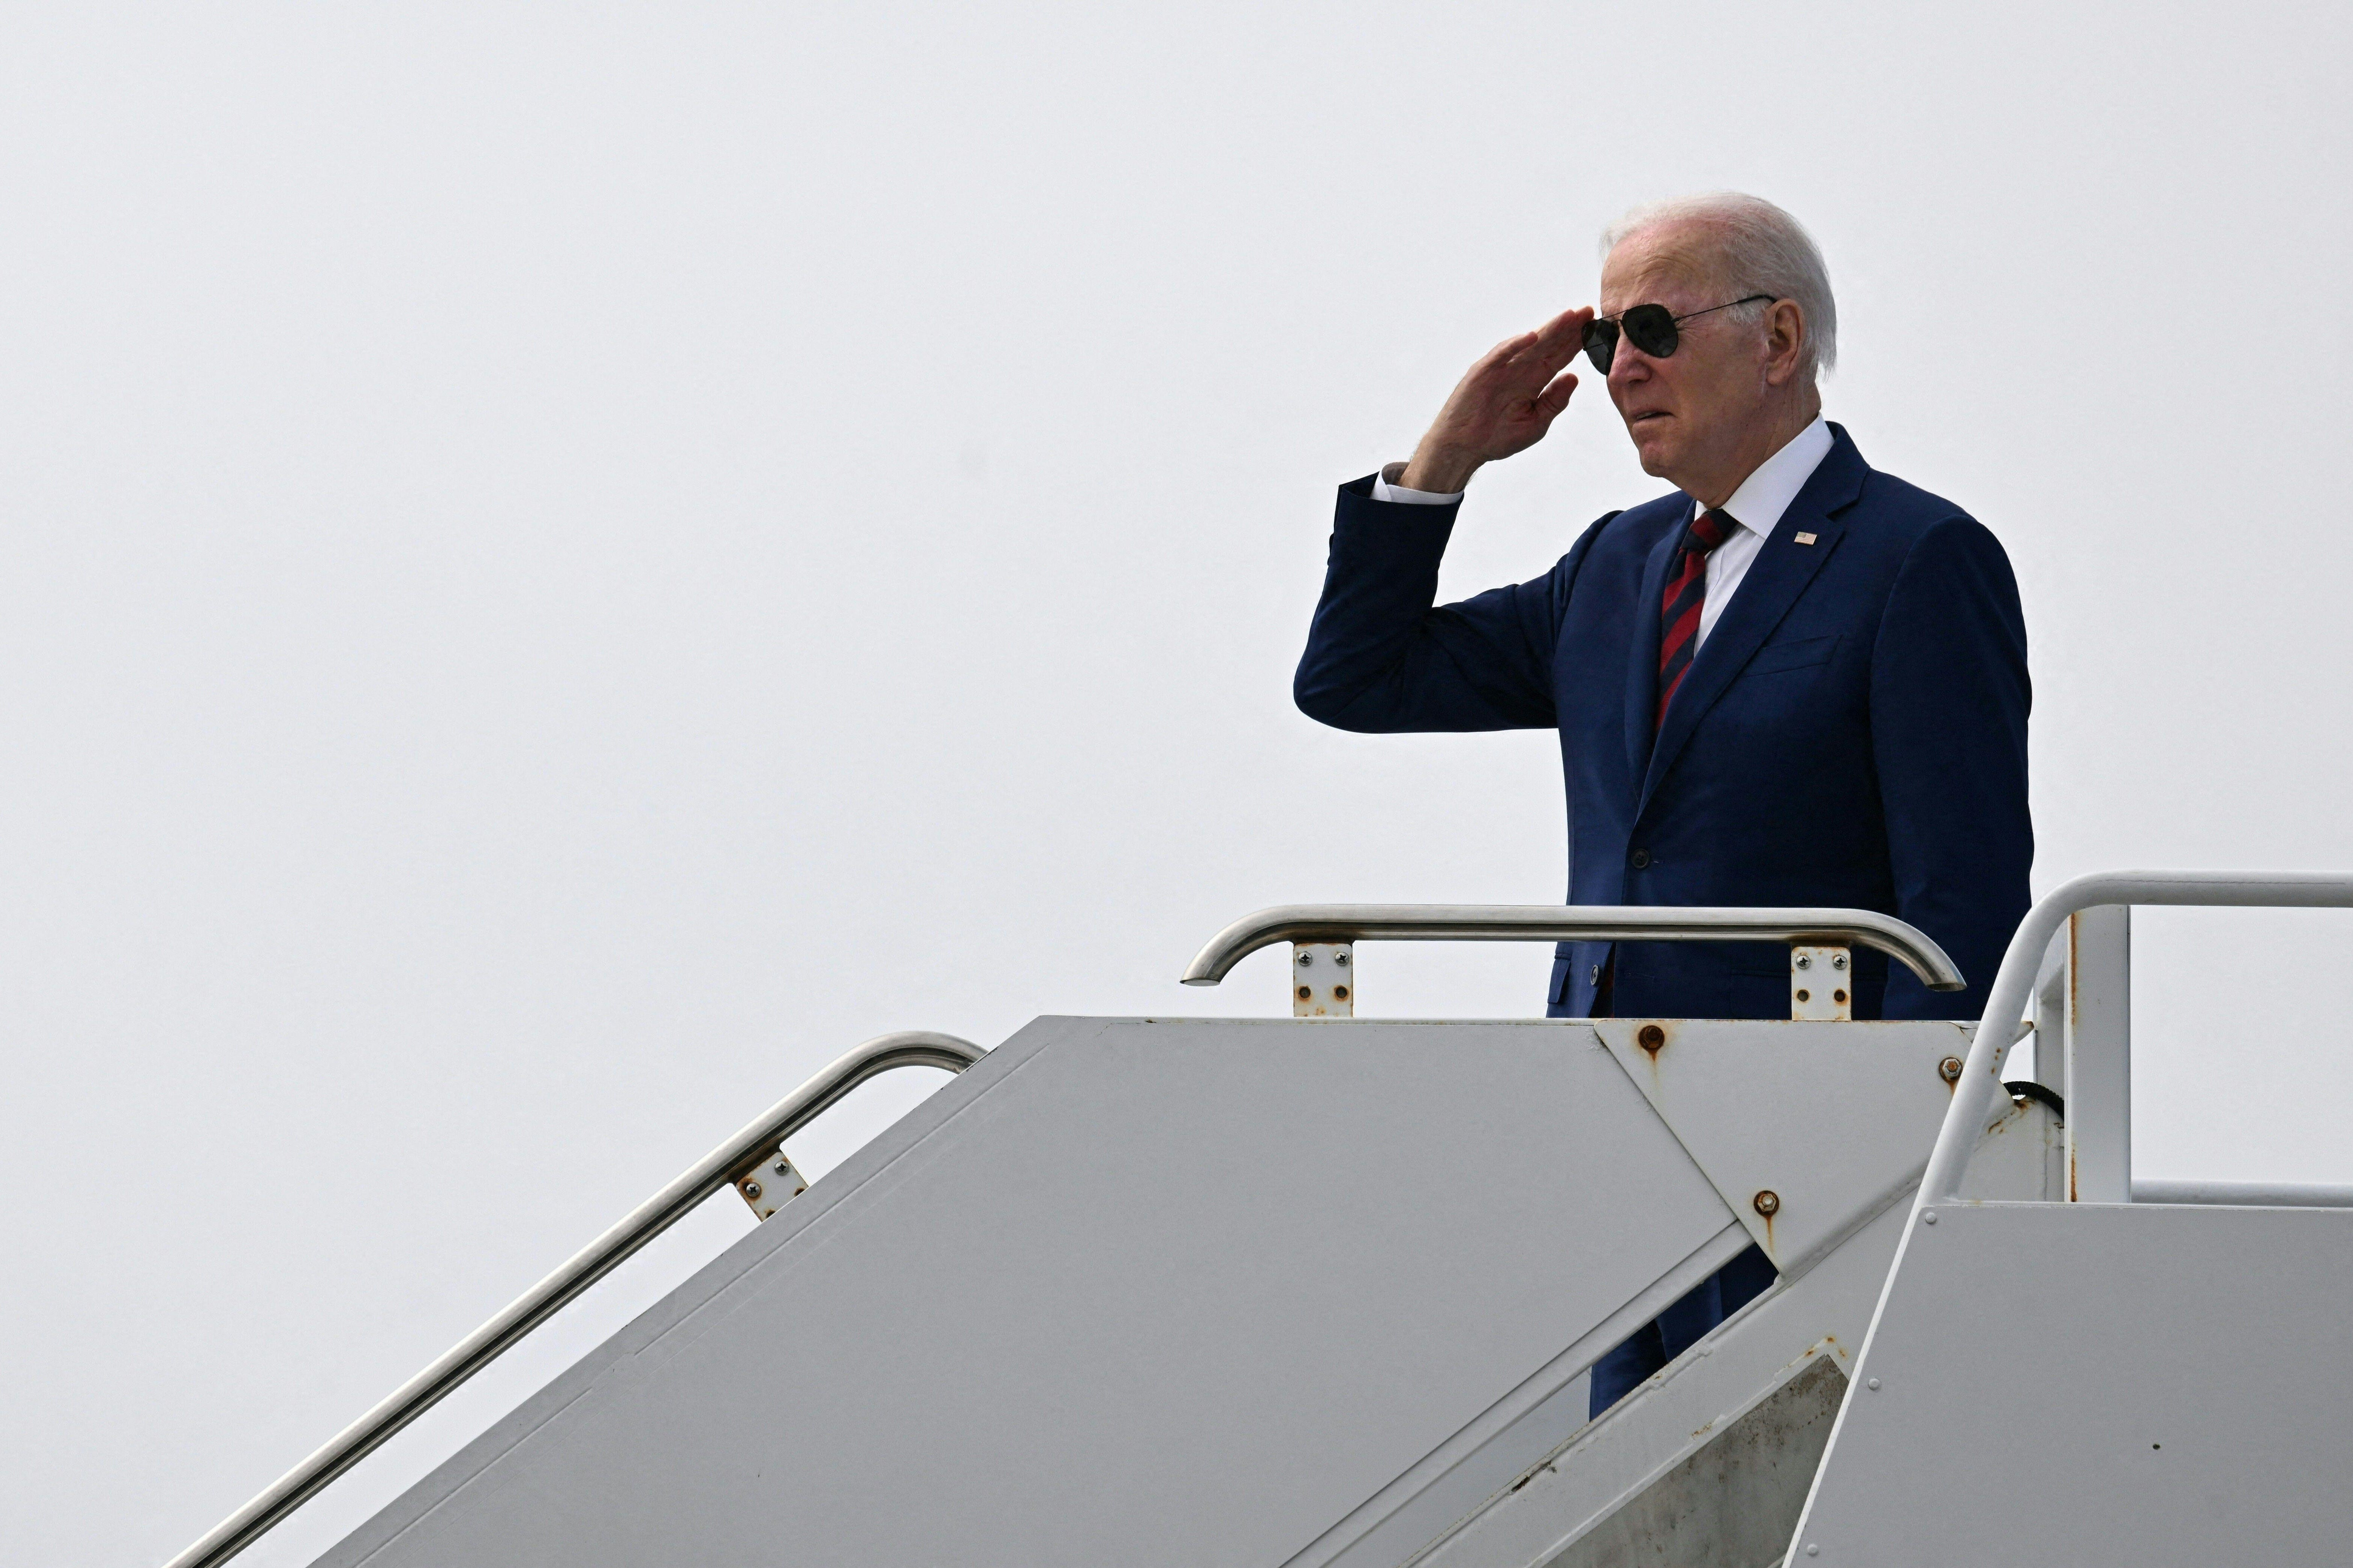  Biden salutes on the stairway to Air Force One.